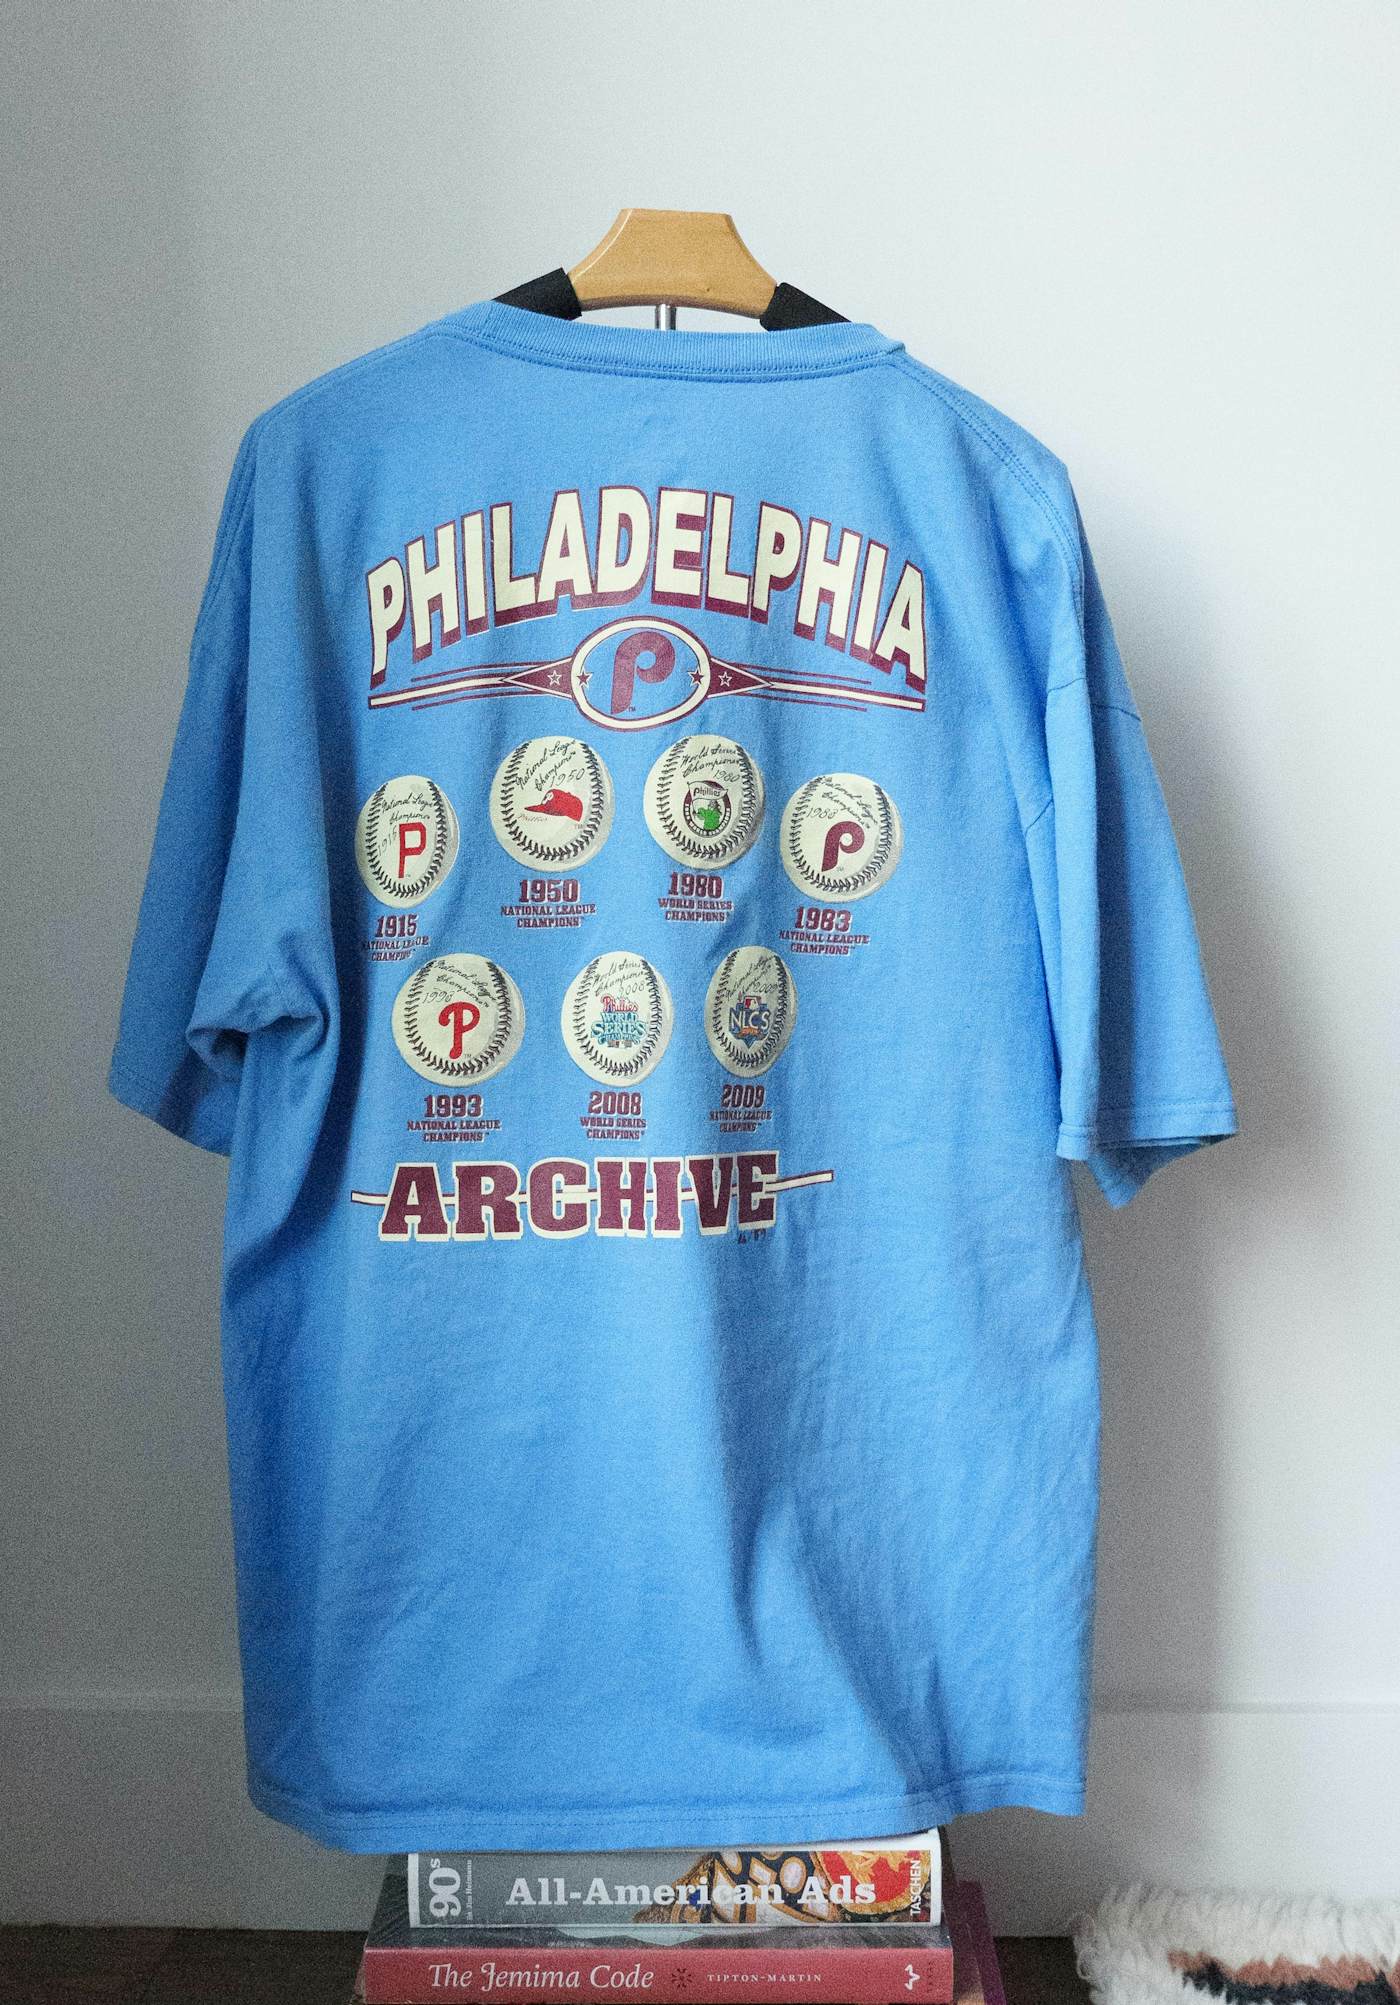 OKAYPLAYER Vintage Phillies Archive T-Shirt